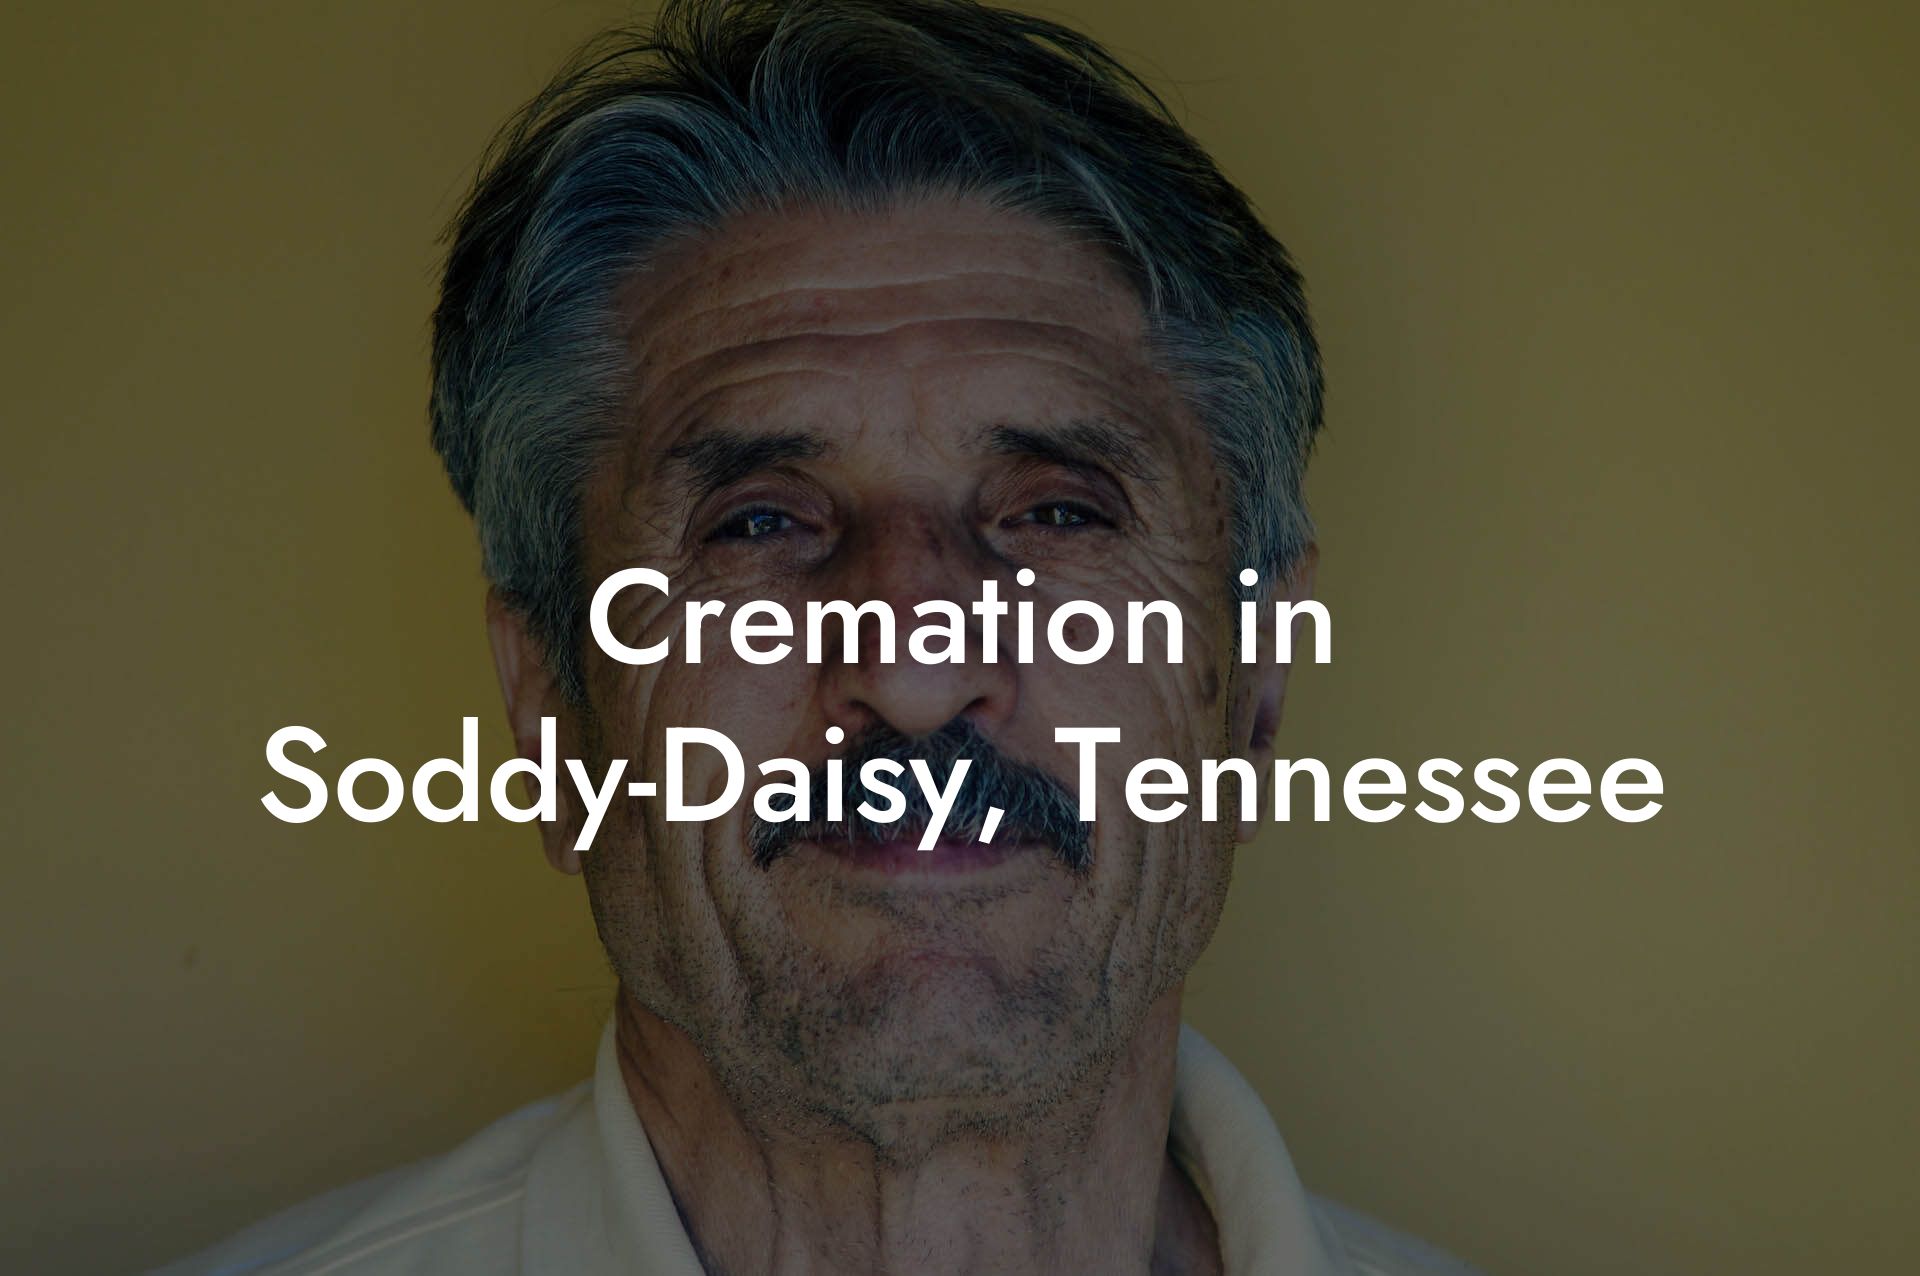 Cremation in Soddy-Daisy, Tennessee